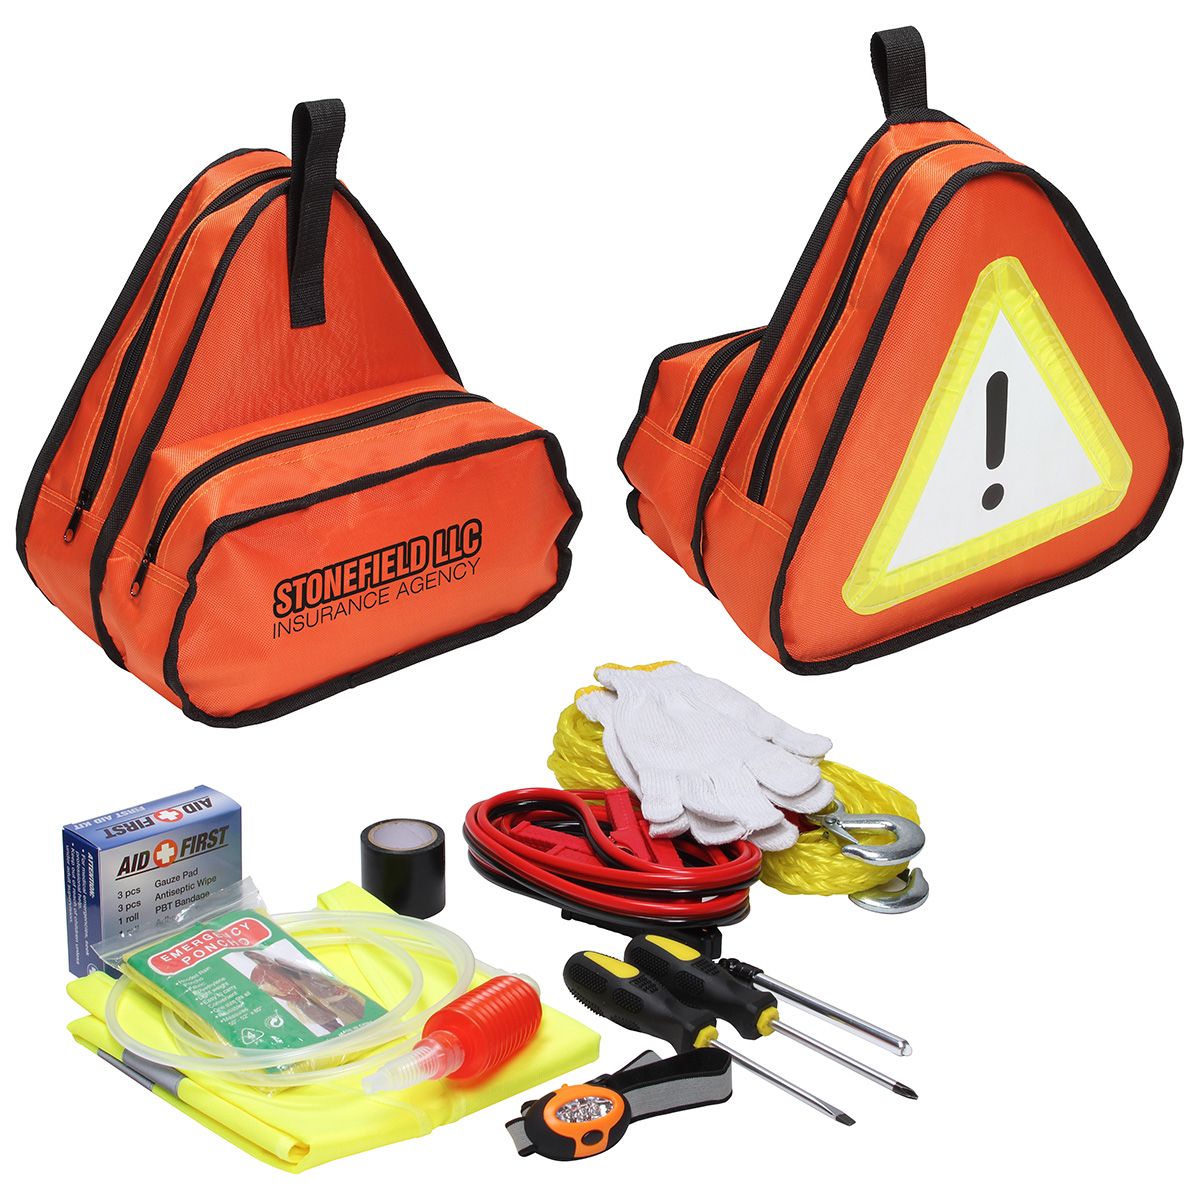 orange triangle bag with black piping and emergency gear in front